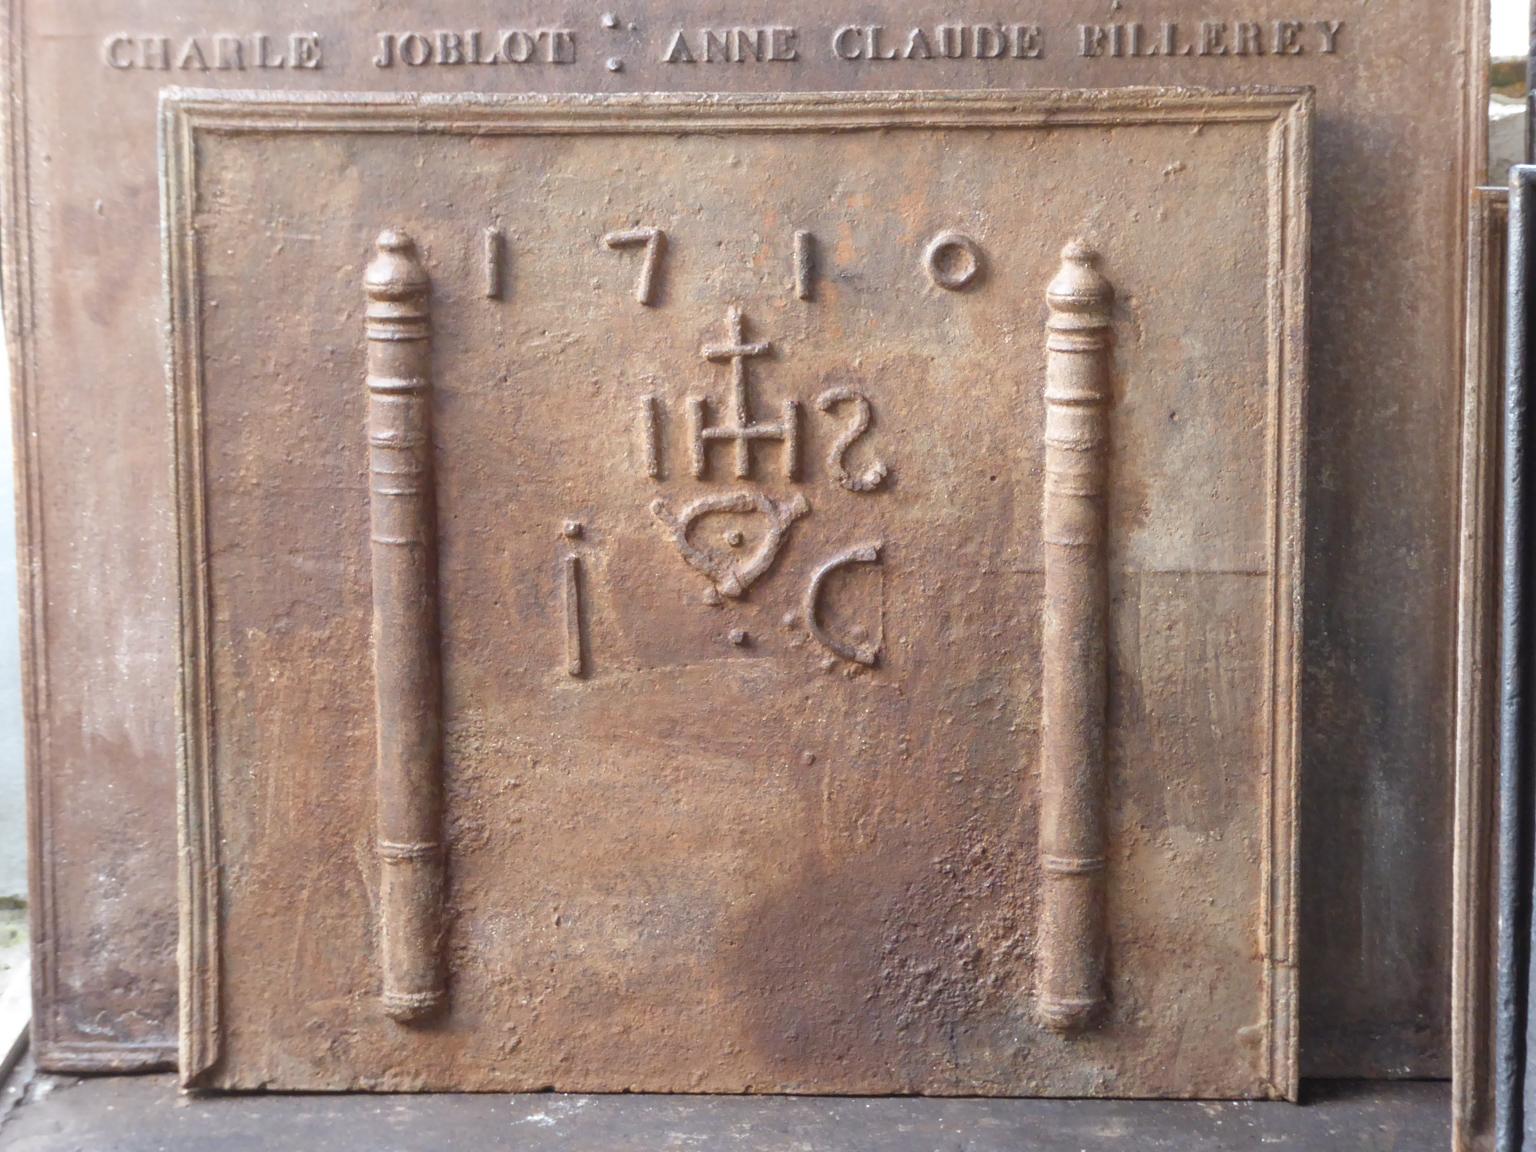 18th century Louis XIV French fireback with pillars, an IHS monogram and the date of production 1710.

The monogram IHS stands for Iesus Hominum Salvator (Jesus the Savior of Humanity) or In Hoc Signo (In this sign will you win). The pillars refer